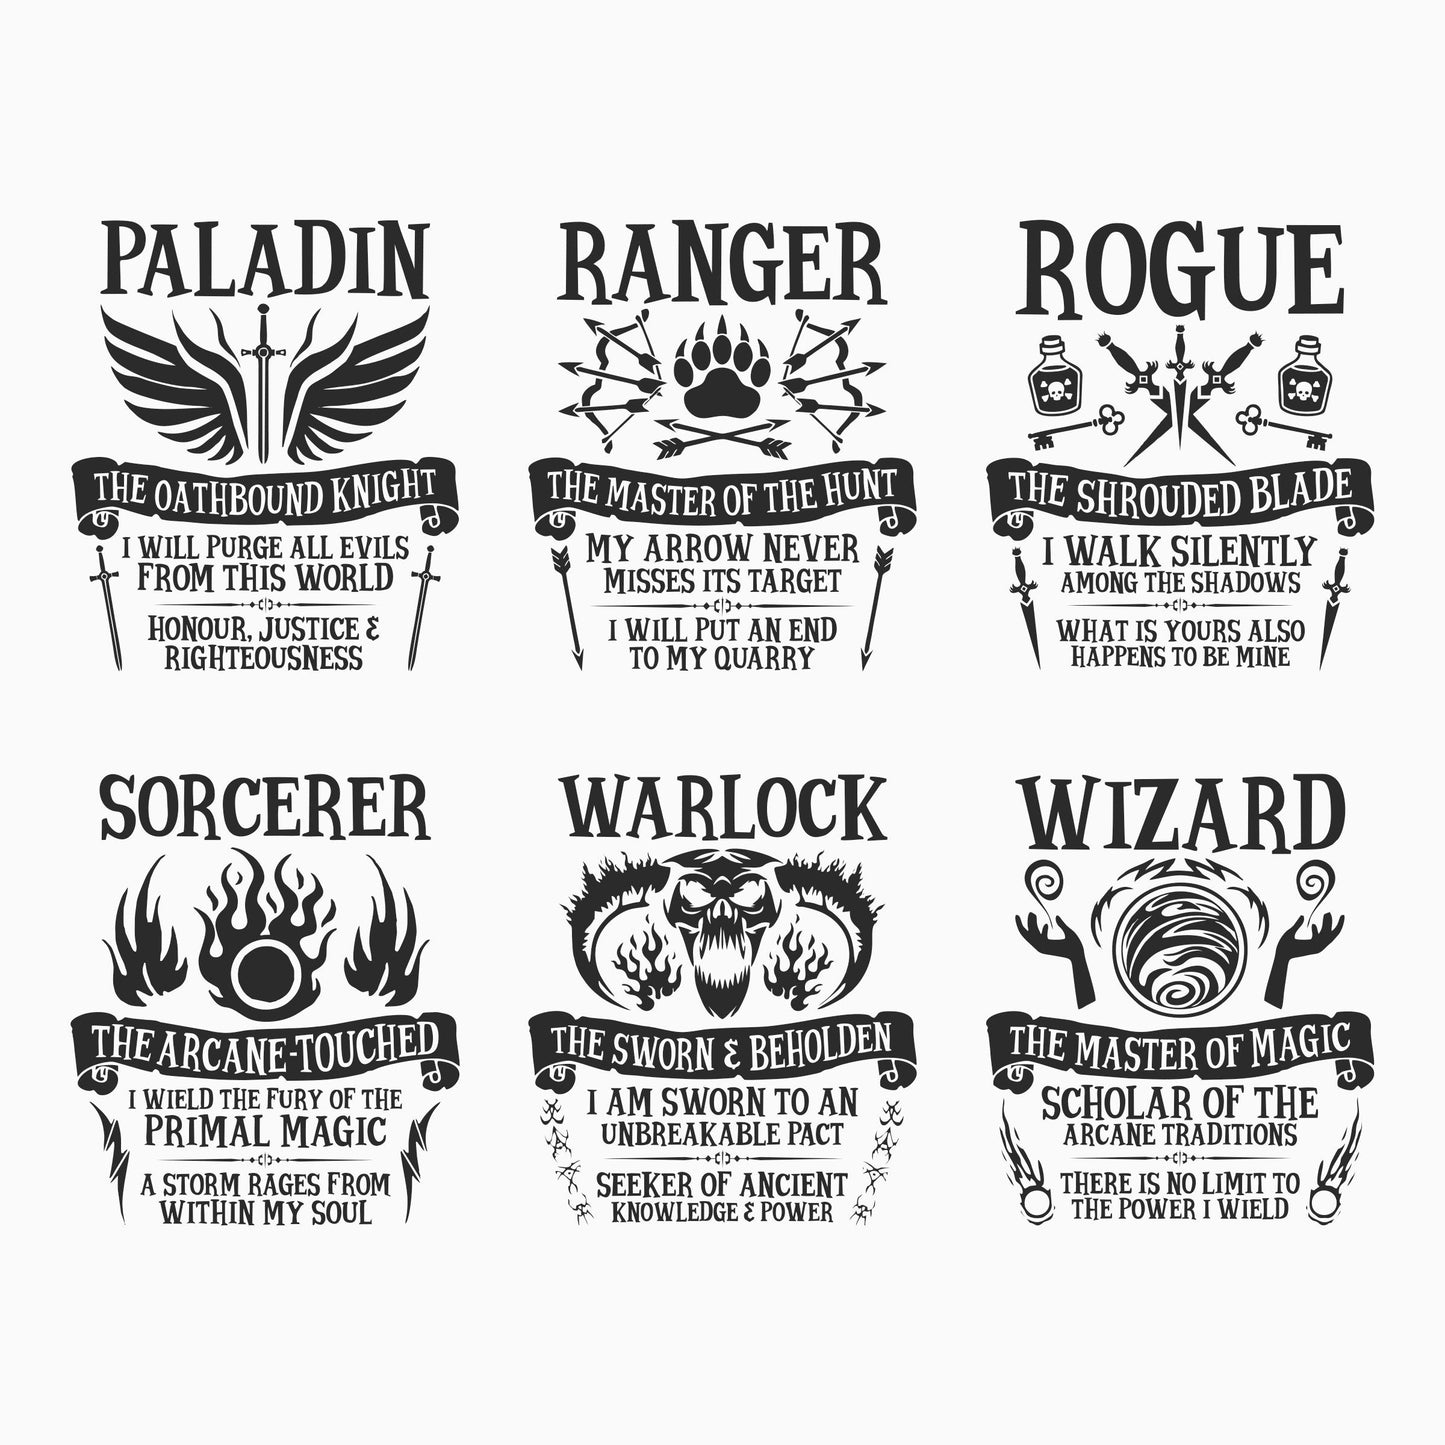 D&D Class Wood Engraved Display, 13 Choices (12 Classes + DM), DnD / Pathfinder / Tabletop RPG Gaming Posters